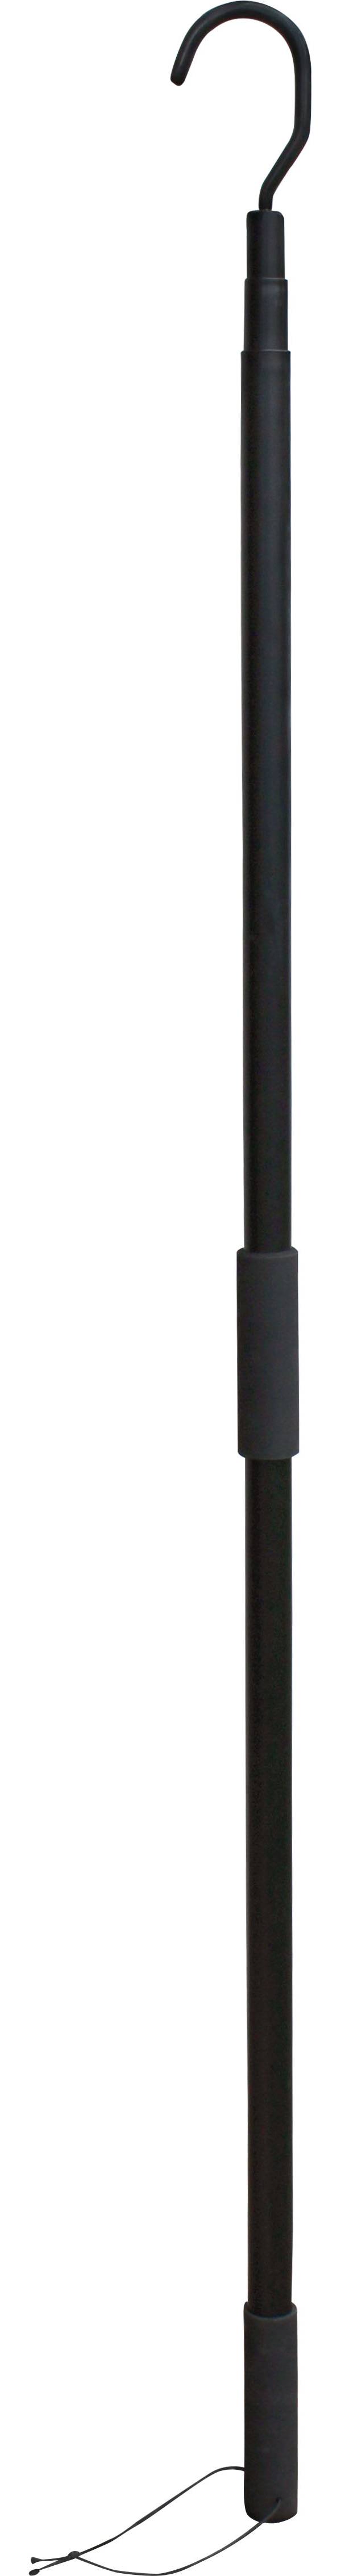 Cupped 12' Decoy Retriever product image